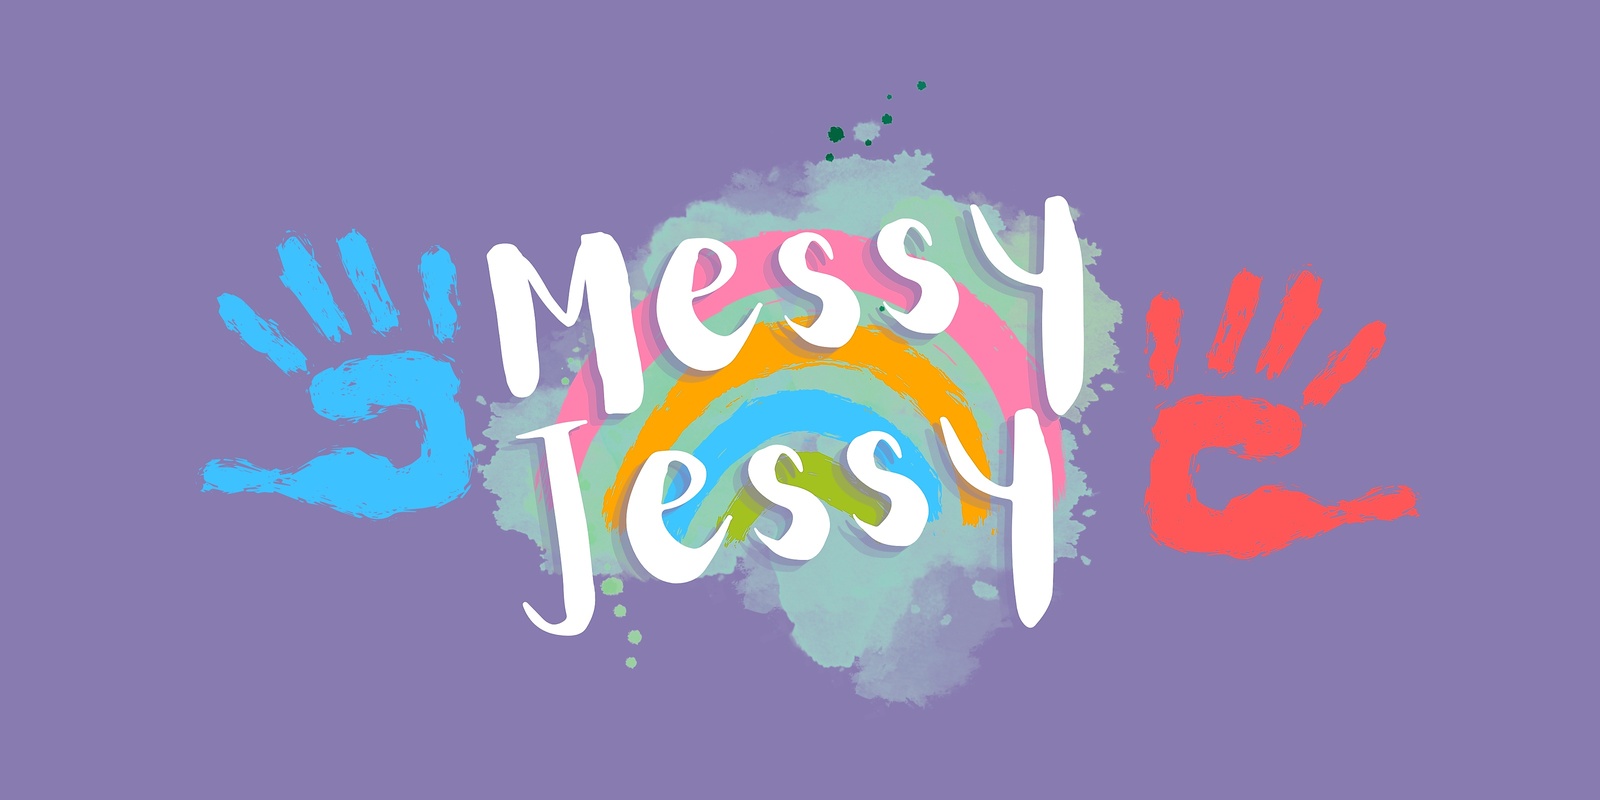 Banner image for Messy Jessy Sensory Monday 11AM